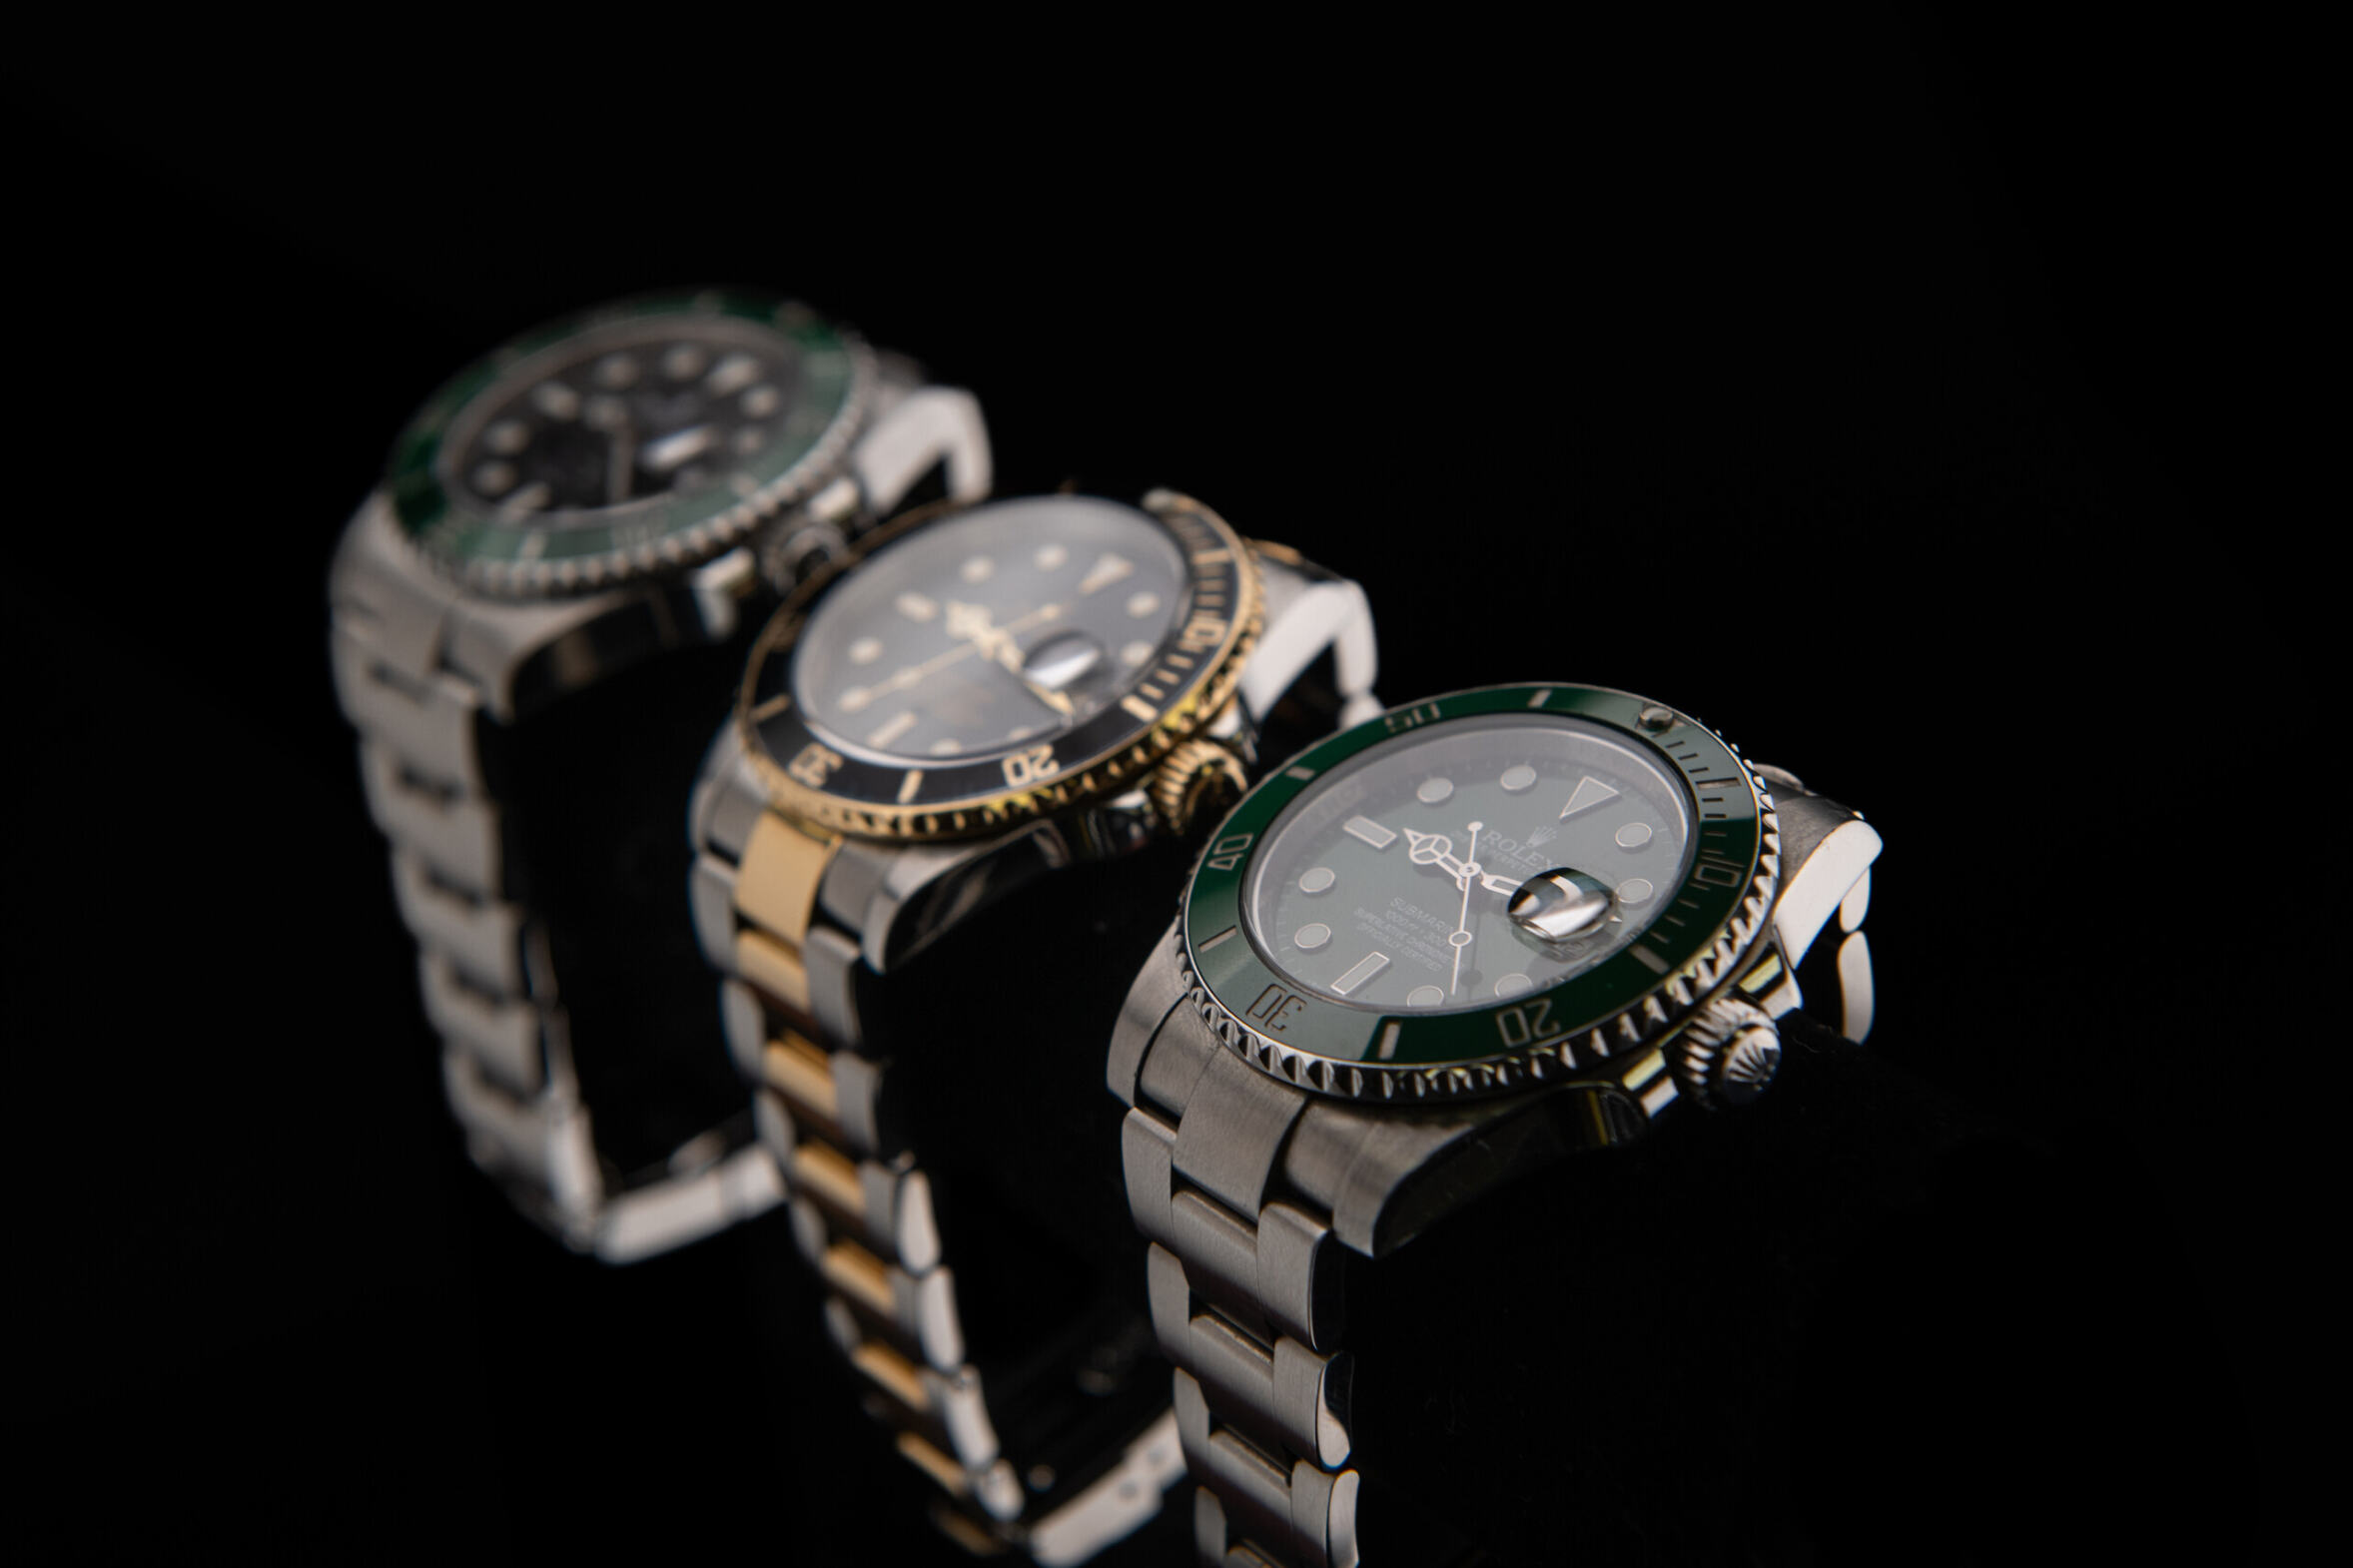 3 aligned Rolex Submariner watches are shown with a black background.